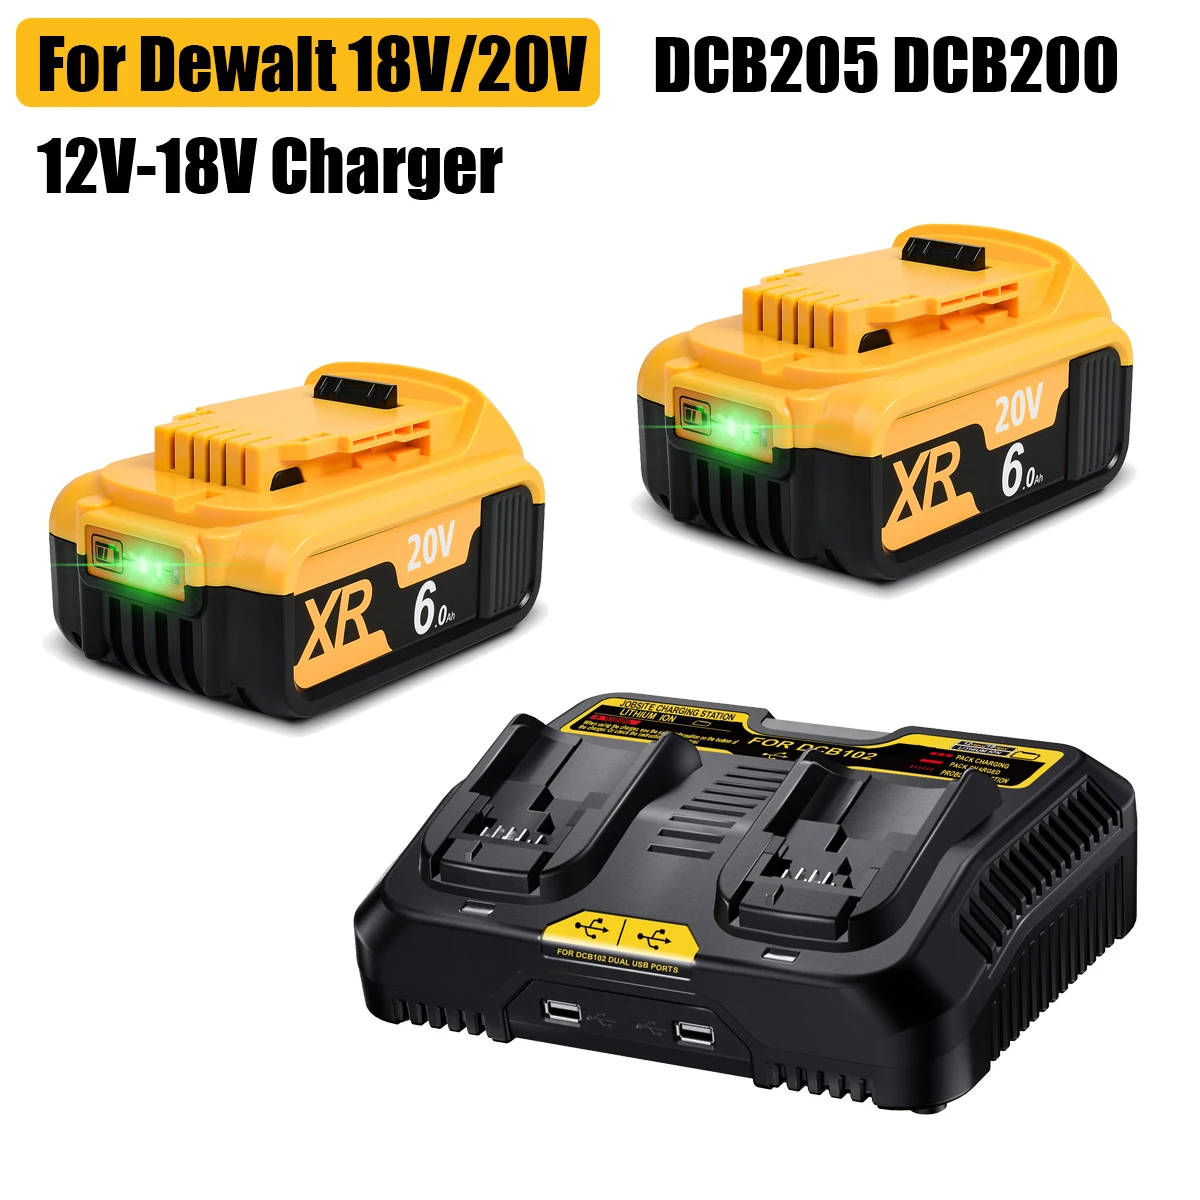 

DCB205 18V/20V Max 6.0Ah Replacement Li-ion Battery for DeWalt 18V 20V Battery DCB184 DCB200 DCB182 DCB180 DCB181 DCB182 DCB201